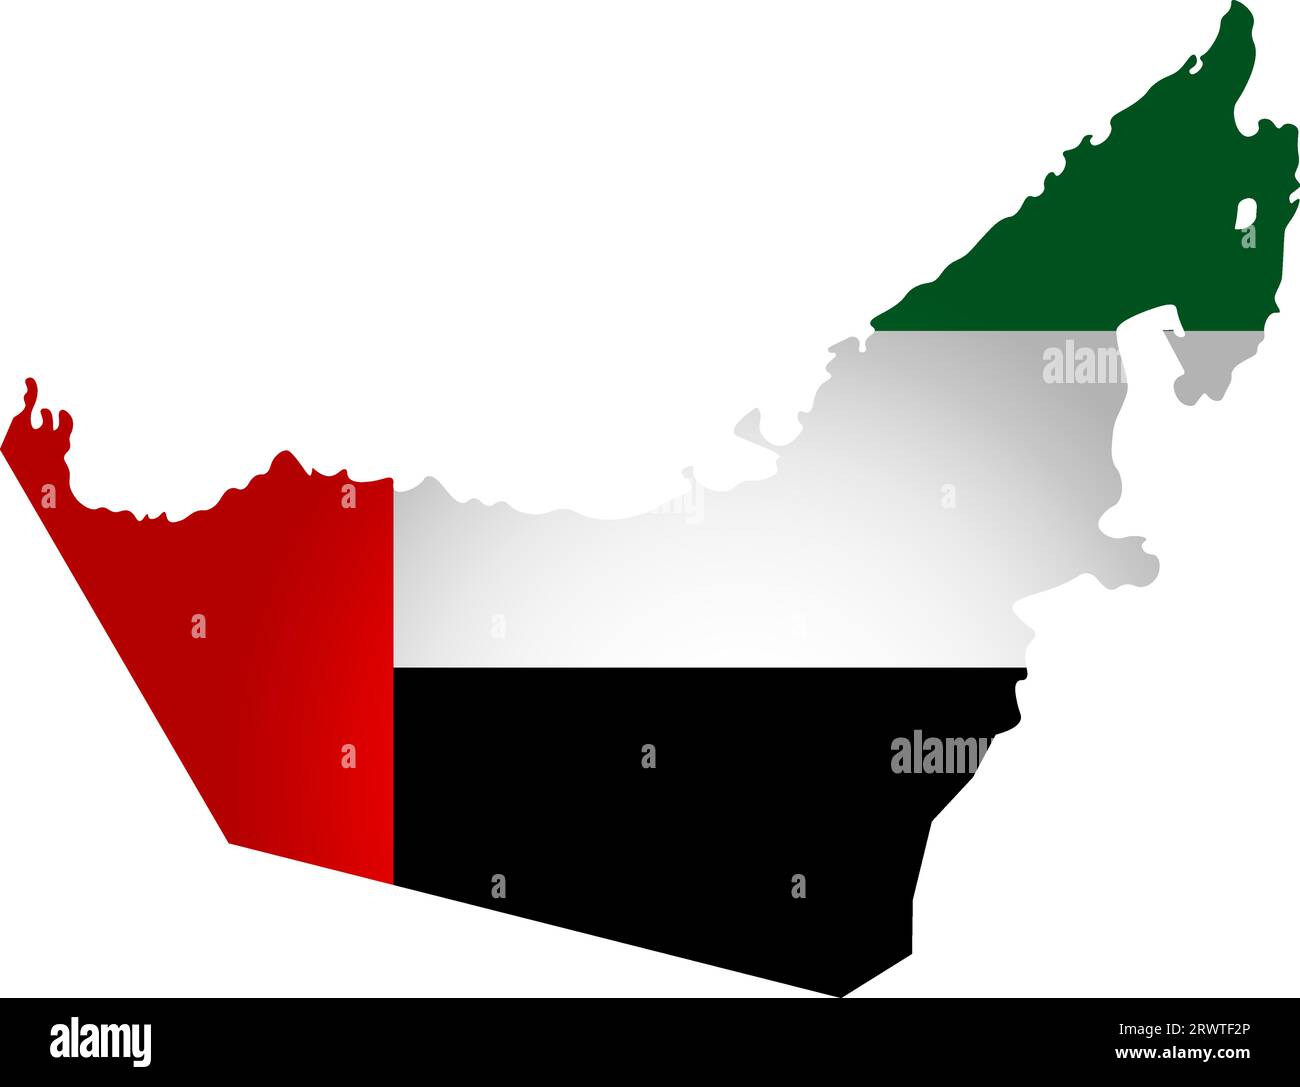 Illustration with national flag with simplified  shape of United Arab Emirates (UAE) map (jpg). Volume shadow on the map. Stock Vector